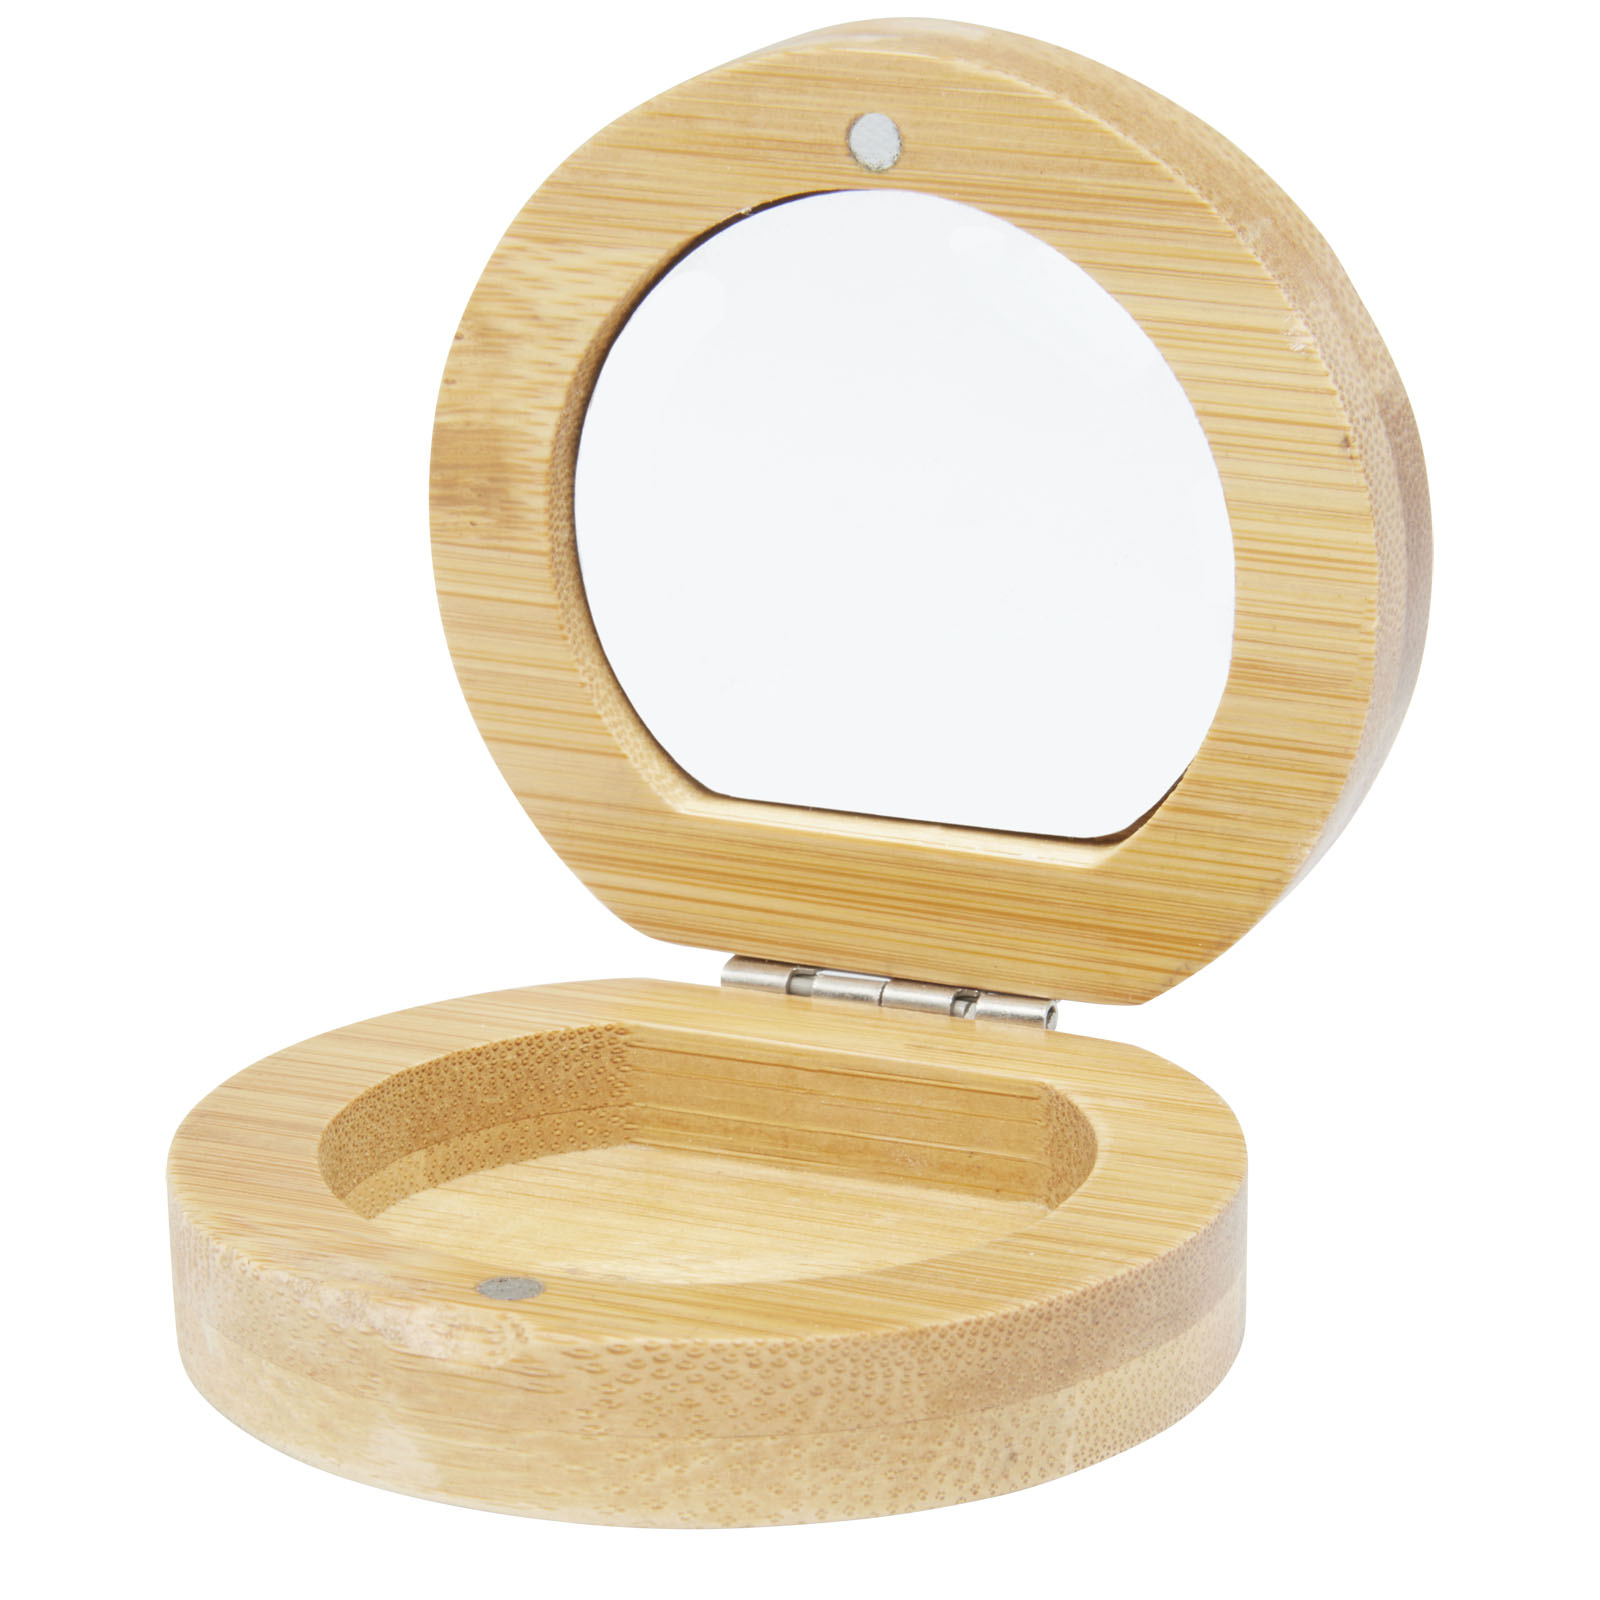 Personal Care - Afrodit bamboo pocket mirror